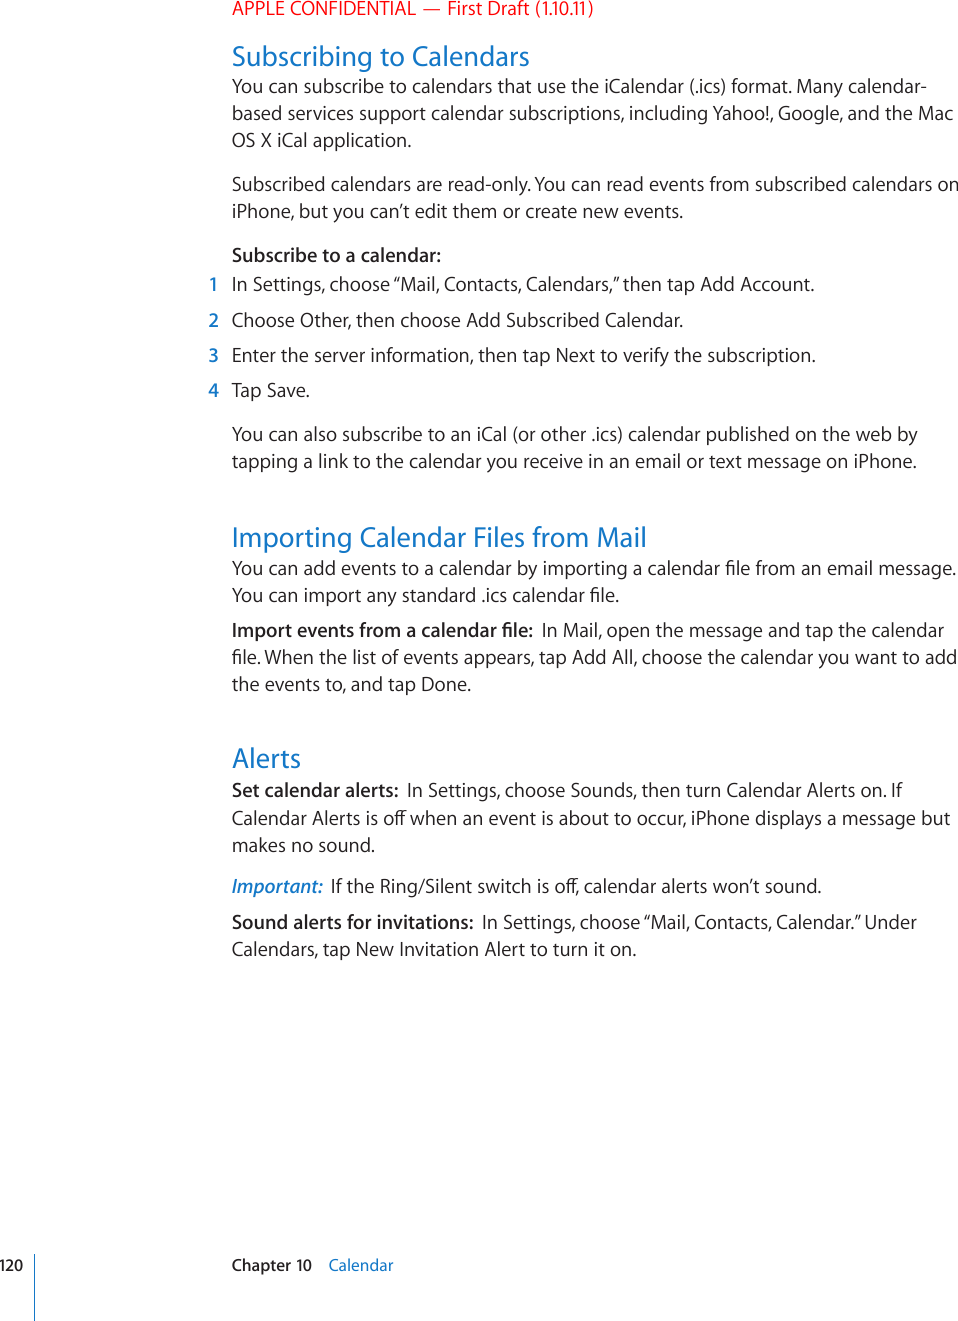 APPLE CONFIDENTIAL — First Draft (1.10.11)Subscribing to CalendarsYou can subscribe to calendars that use the iCalendar (.ics) format. Many calendar-based services support calendar subscriptions, including Yahoo!, Google, and the Mac OS X iCal application.Subscribed calendars are read-only. You can read events from subscribed calendars on iPhone, but you can’t edit them or create new events.Subscribe to a calendar:    1  In Settings, choose “Mail, Contacts, Calendars,” then tap Add Account.  2  Choose Other, then choose Add Subscribed Calendar.  3  Enter the server information, then tap Next to verify the subscription.  4  Tap Save.You can also subscribe to an iCal (or other .ics) calendar published on the web by tapping a link to the calendar you receive in an email or text message on iPhone.Importing Calendar Files from Mail;QWECPCFFGXGPVUVQCECNGPFCTD[KORQTVKPICECNGPFCT°NGHTQOCPGOCKNOGUUCIG;QWECPKORQTVCP[UVCPFCTFKEUECNGPFCT°NG+ORQTVGXGPVUHTQOCECNGPFCT°NGIn Mail, open the message and tap the calendar °NG9JGPVJGNKUVQHGXGPVUCRRGCTUVCR#FF#NNEJQQUGVJGECNGPFCT[QWYCPVVQCFFthe events to, and tap Done.AlertsSet calendar alerts:  In Settings, choose Sounds, then turn Calendar Alerts on. If %CNGPFCT#NGTVUKUQÒYJGPCPGXGPVKUCDQWVVQQEEWTK2JQPGFKURNC[UCOGUUCIGDWVmakes no sound.Important:  +HVJG4KPI5KNGPVUYKVEJKUQÒECNGPFCTCNGTVUYQP¨VUQWPFSound alerts for invitations:  In Settings, choose “Mail, Contacts, Calendar.” Under Calendars, tap New Invitation Alert to turn it on.120 Chapter 10    Calendar